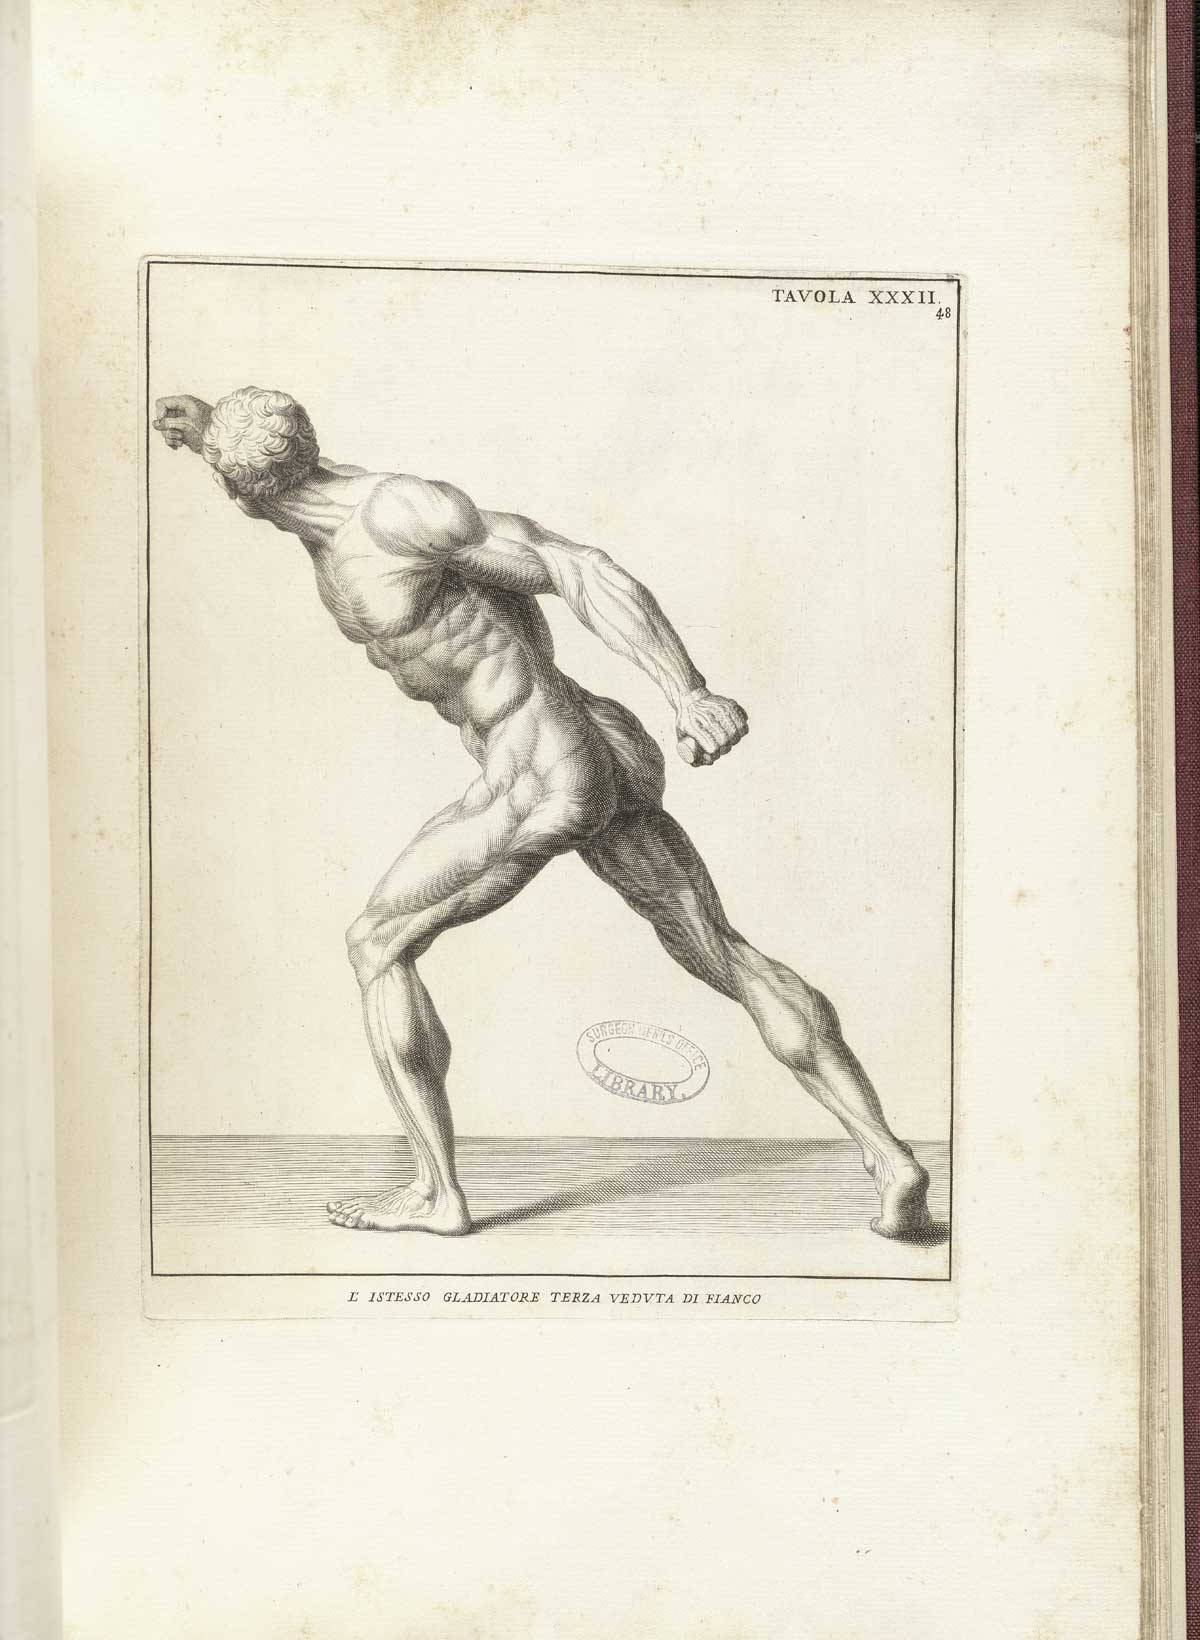 Engraving of the statue the Borghese Gladiator, a nude male figure viewed from the left side, lunging forward with his right hand raised as if with a sword to fight an opponent on horseback; from Bernardino Genga’s Anatomia per uso et intelligenza del disegno, NLM Call no.: WZ 250 G329an 1691.